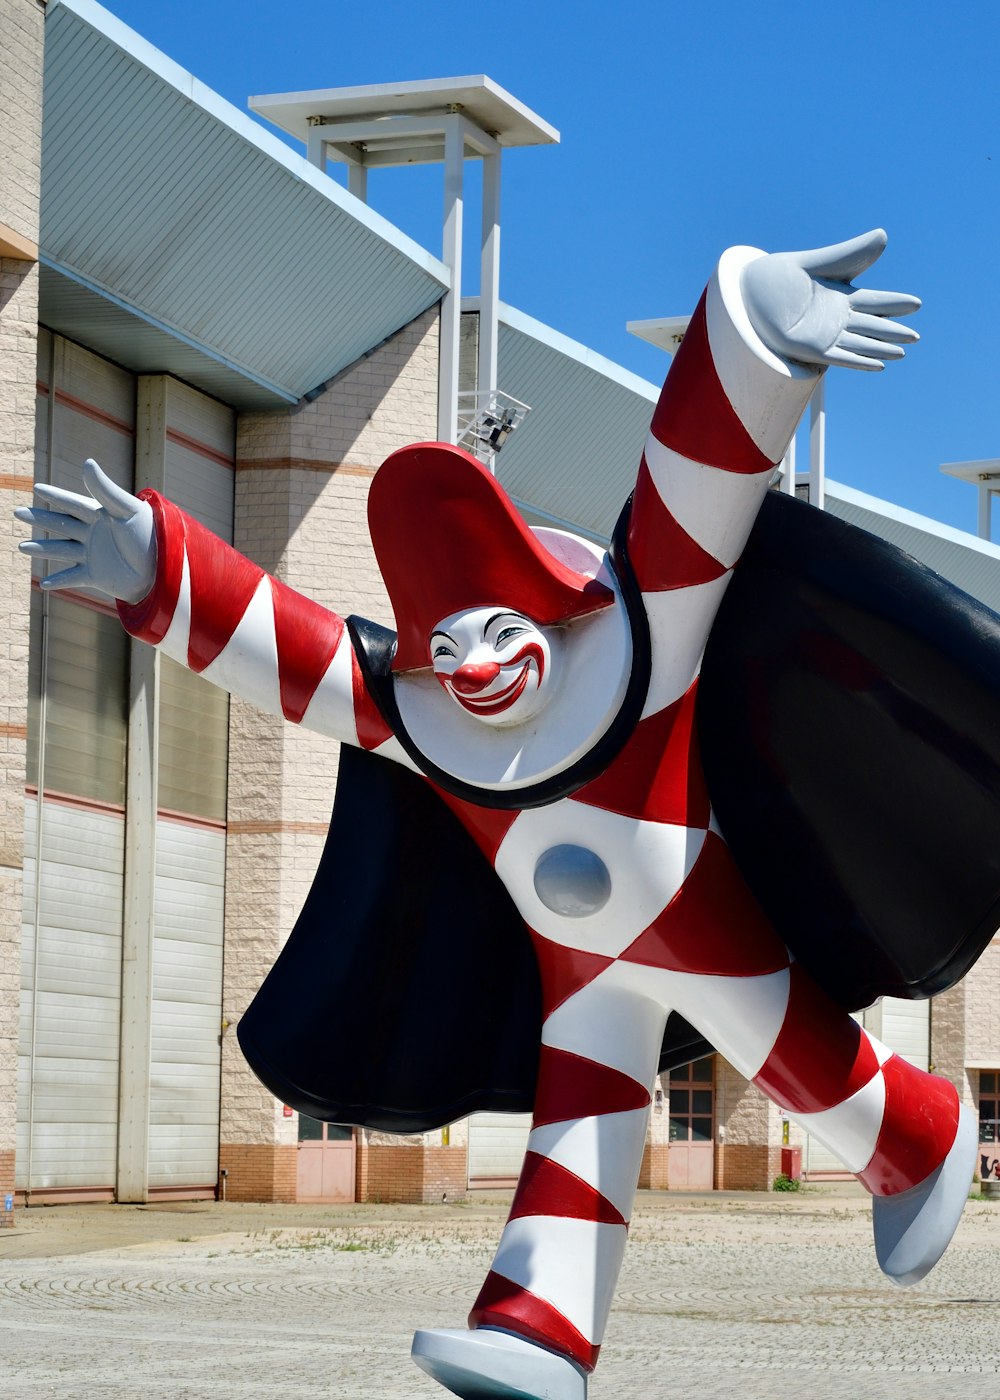 white, red, and black clown statue